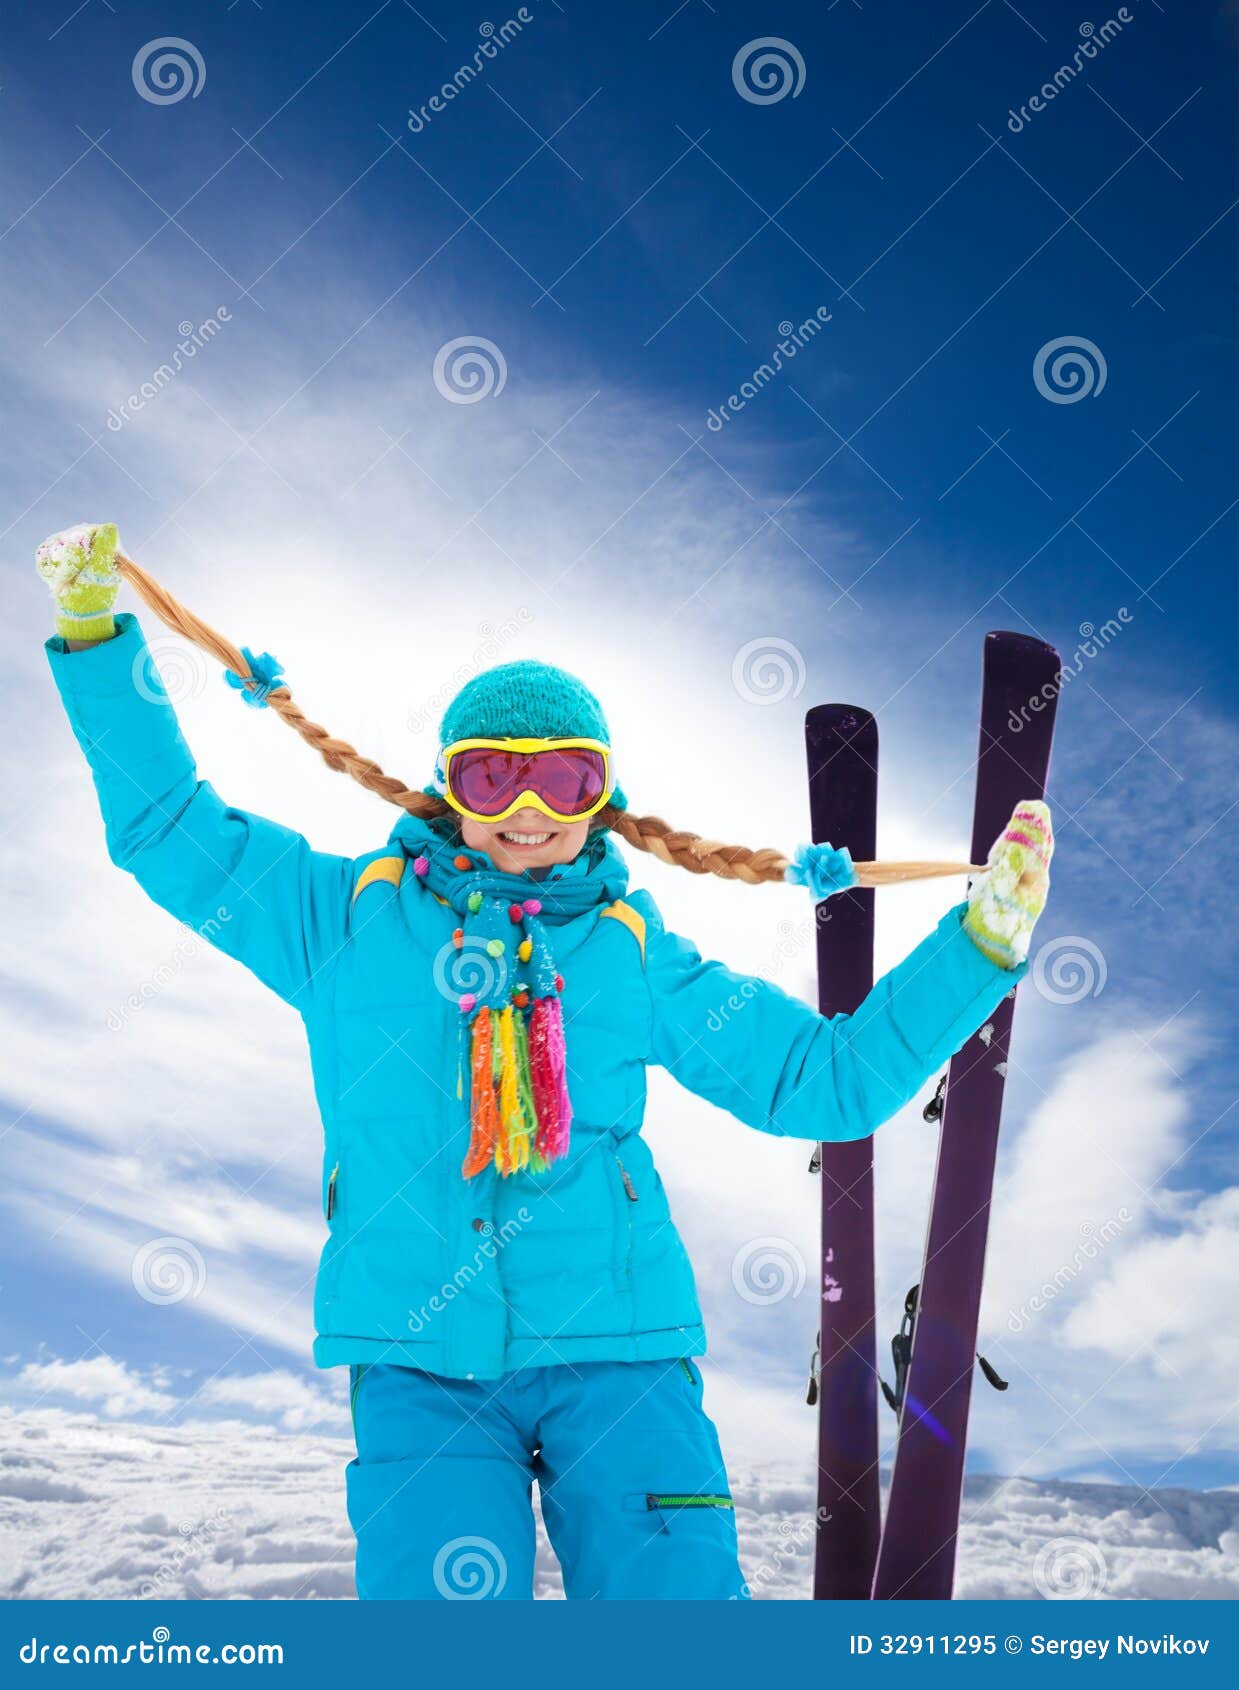 Blond, Cute Girl on Ski Winter Vacation Stock Image - Image of mountain,  skier: 32911295